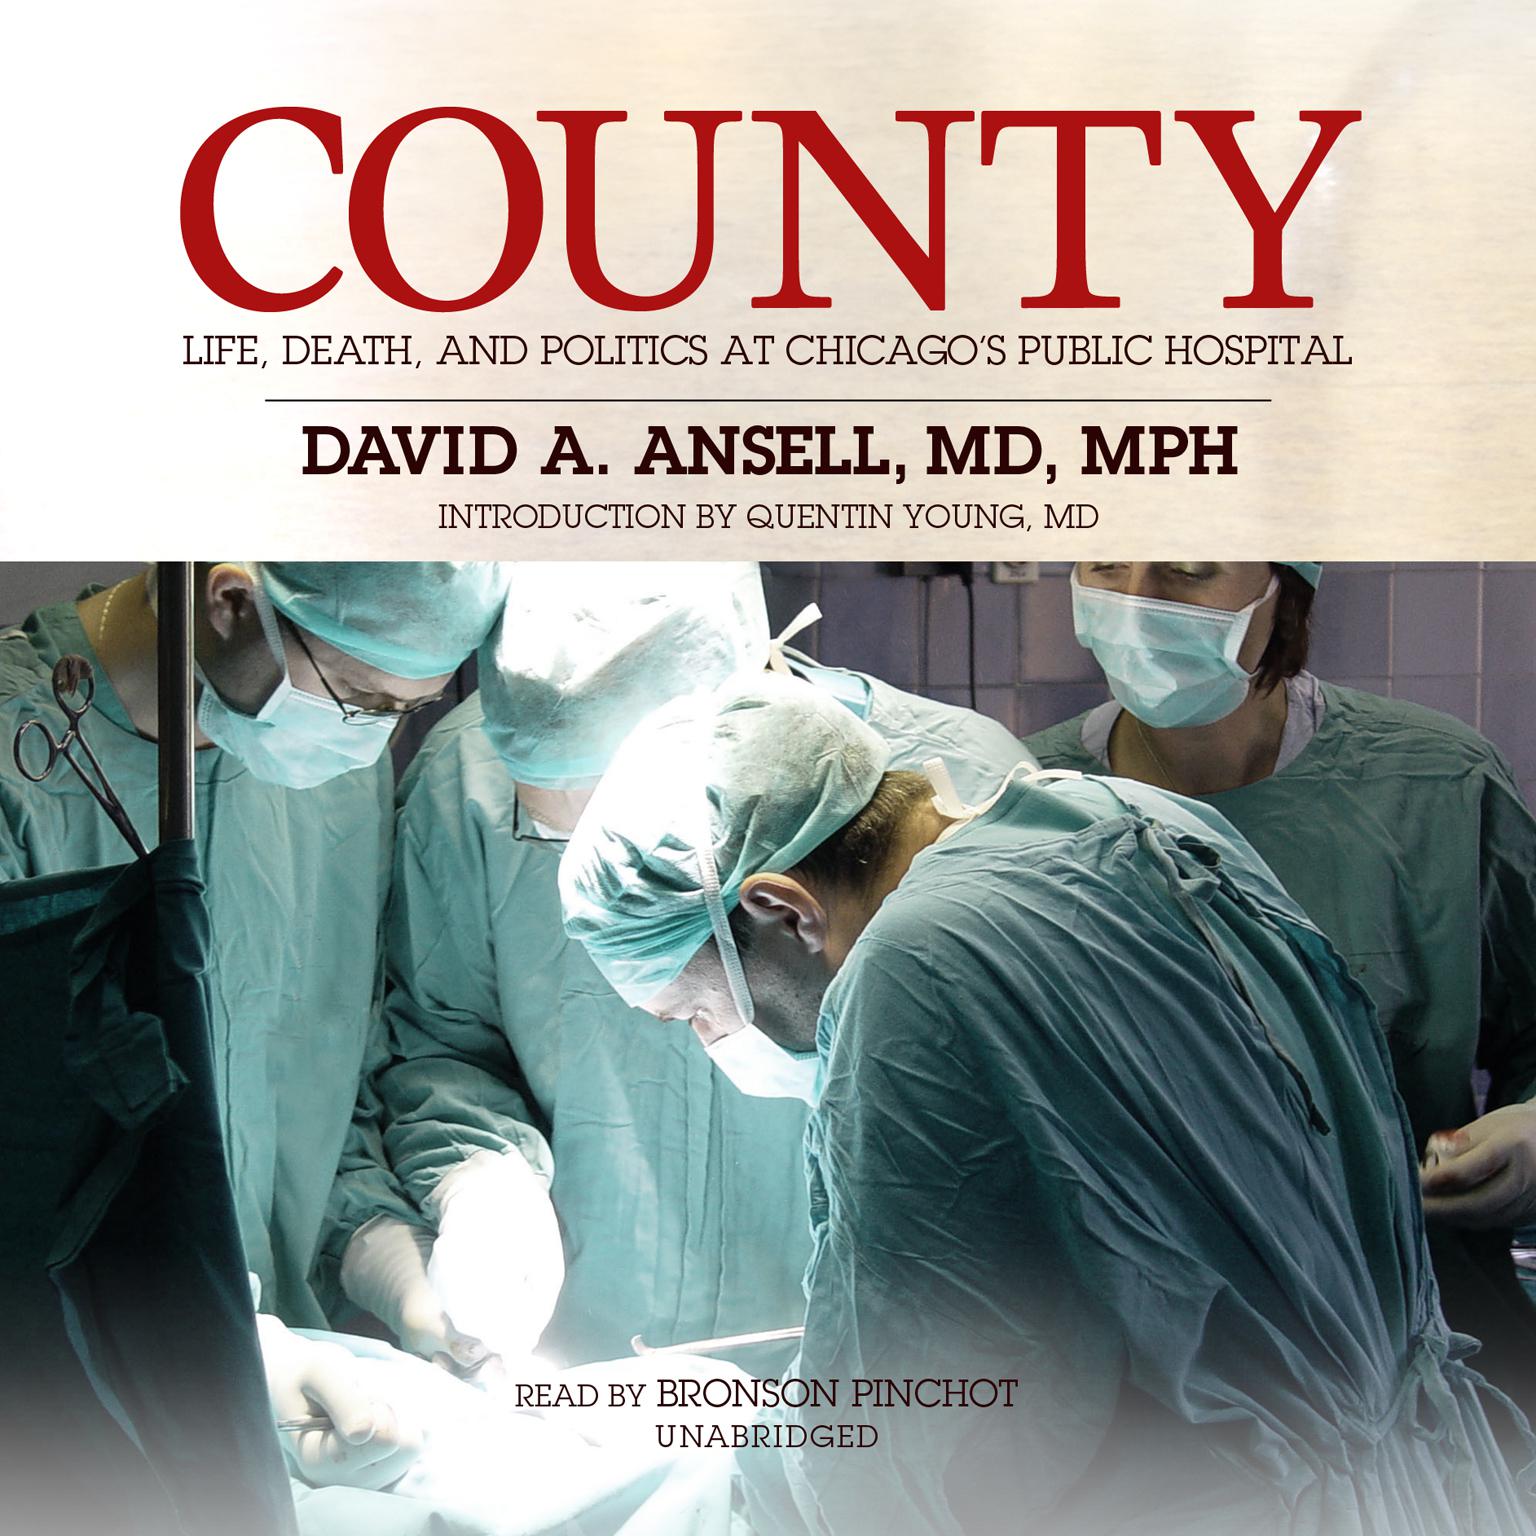 County: Life, Death, and Politics at Chicago’s Public Hospital Audiobook, by David A. Ansell